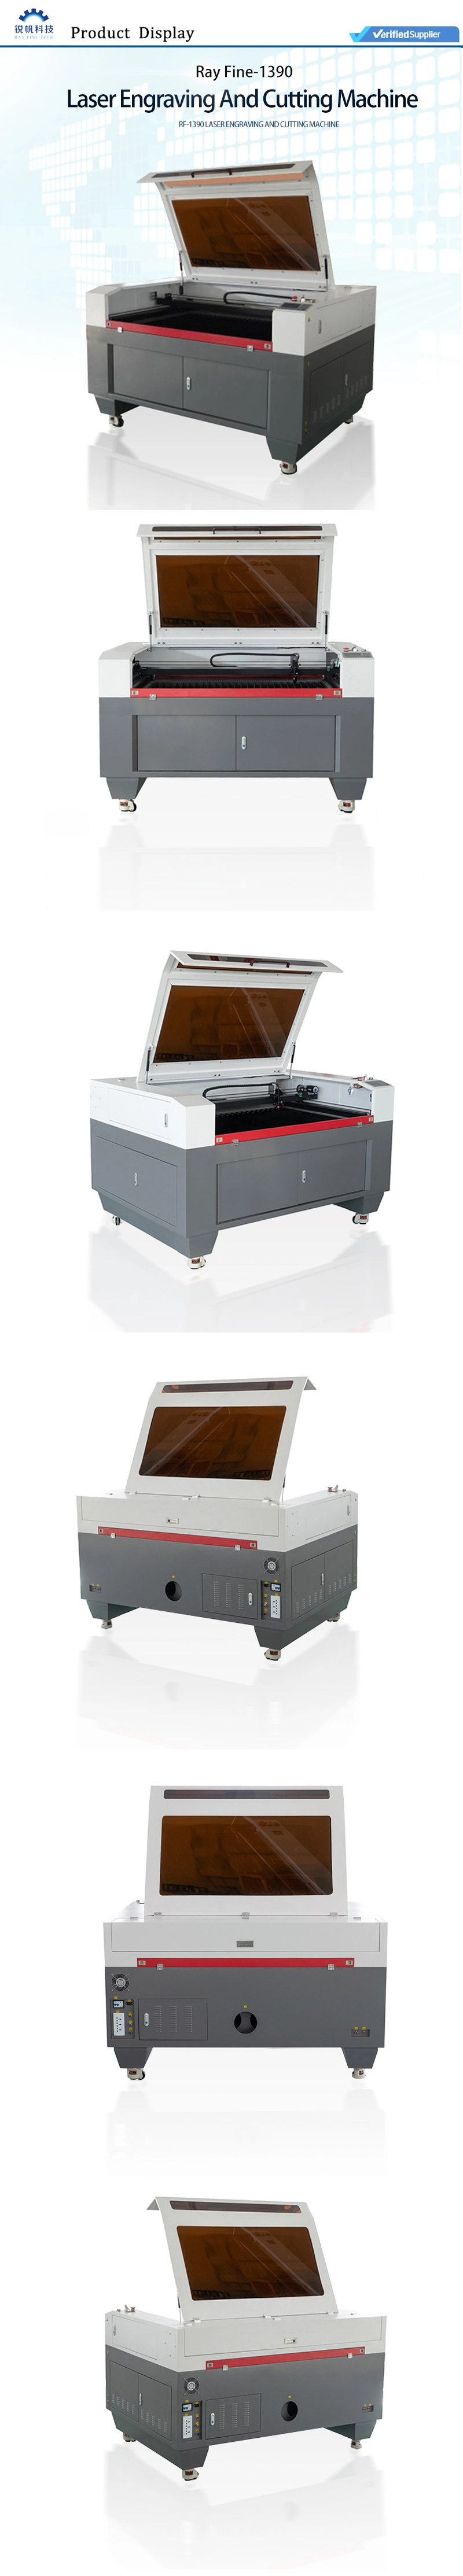 1390 Laser Engraving Machine for Wood Acrylic Plywood Cutting and Engraving